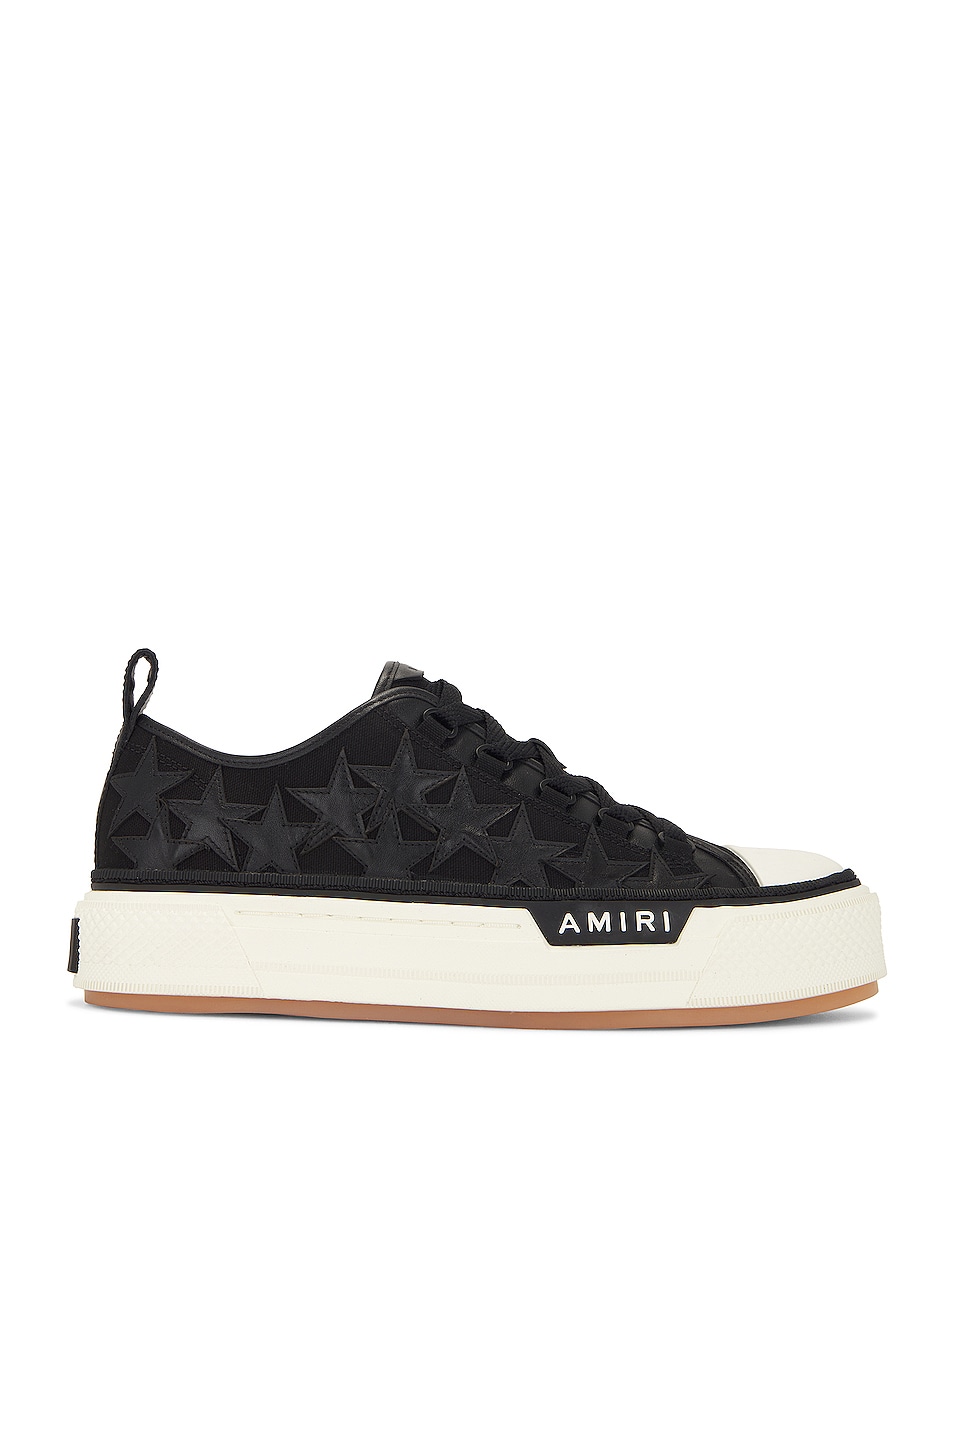 Image 1 of Amiri Stars Court Low Top Sneakers in Black & White